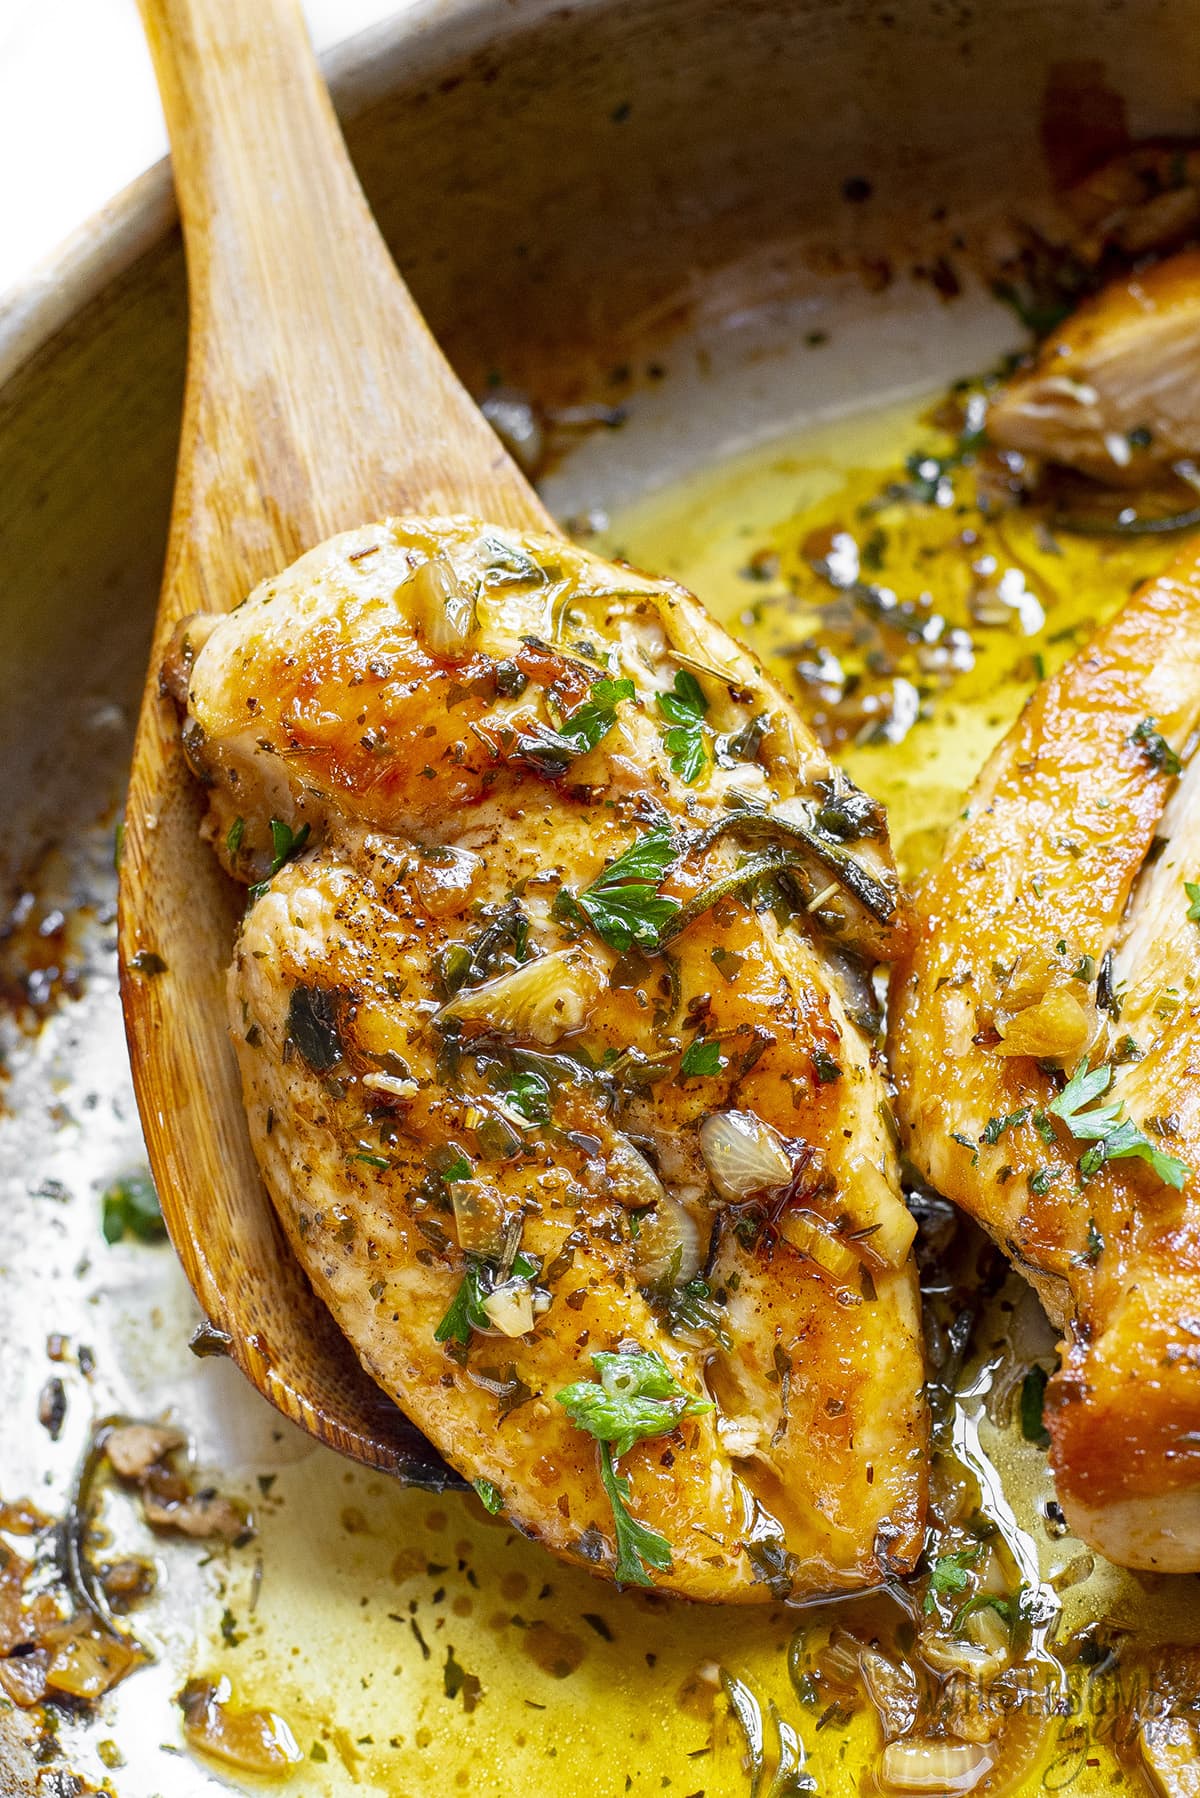 Juicy garlic butter chicken breast lifted with a wooden spoon and garnished with fresh herbs.